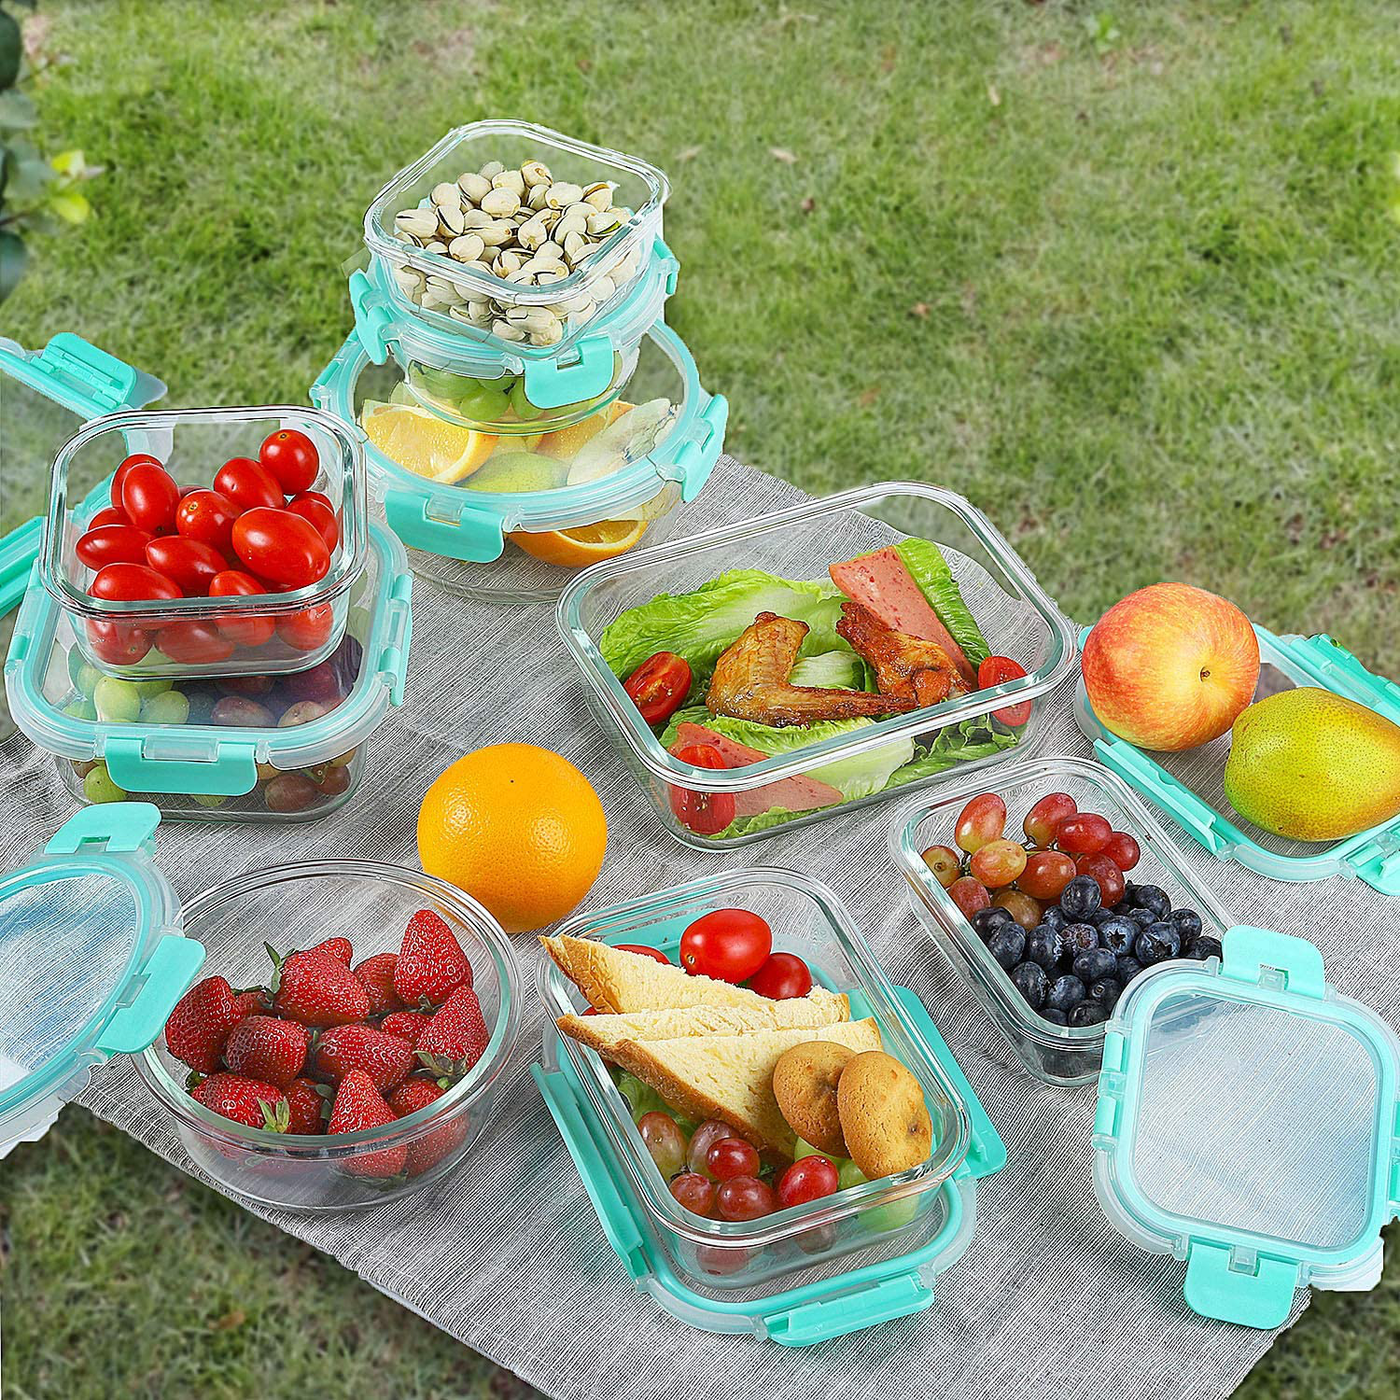 Bayco Glass Food Storage Containers with Lids, [18 Piece] Glass Meal Prep Containers, Airtight Glass Lunch Bento Boxes, BPA-Free & Leak Proof (9 lids & 9 Containers) - Grey